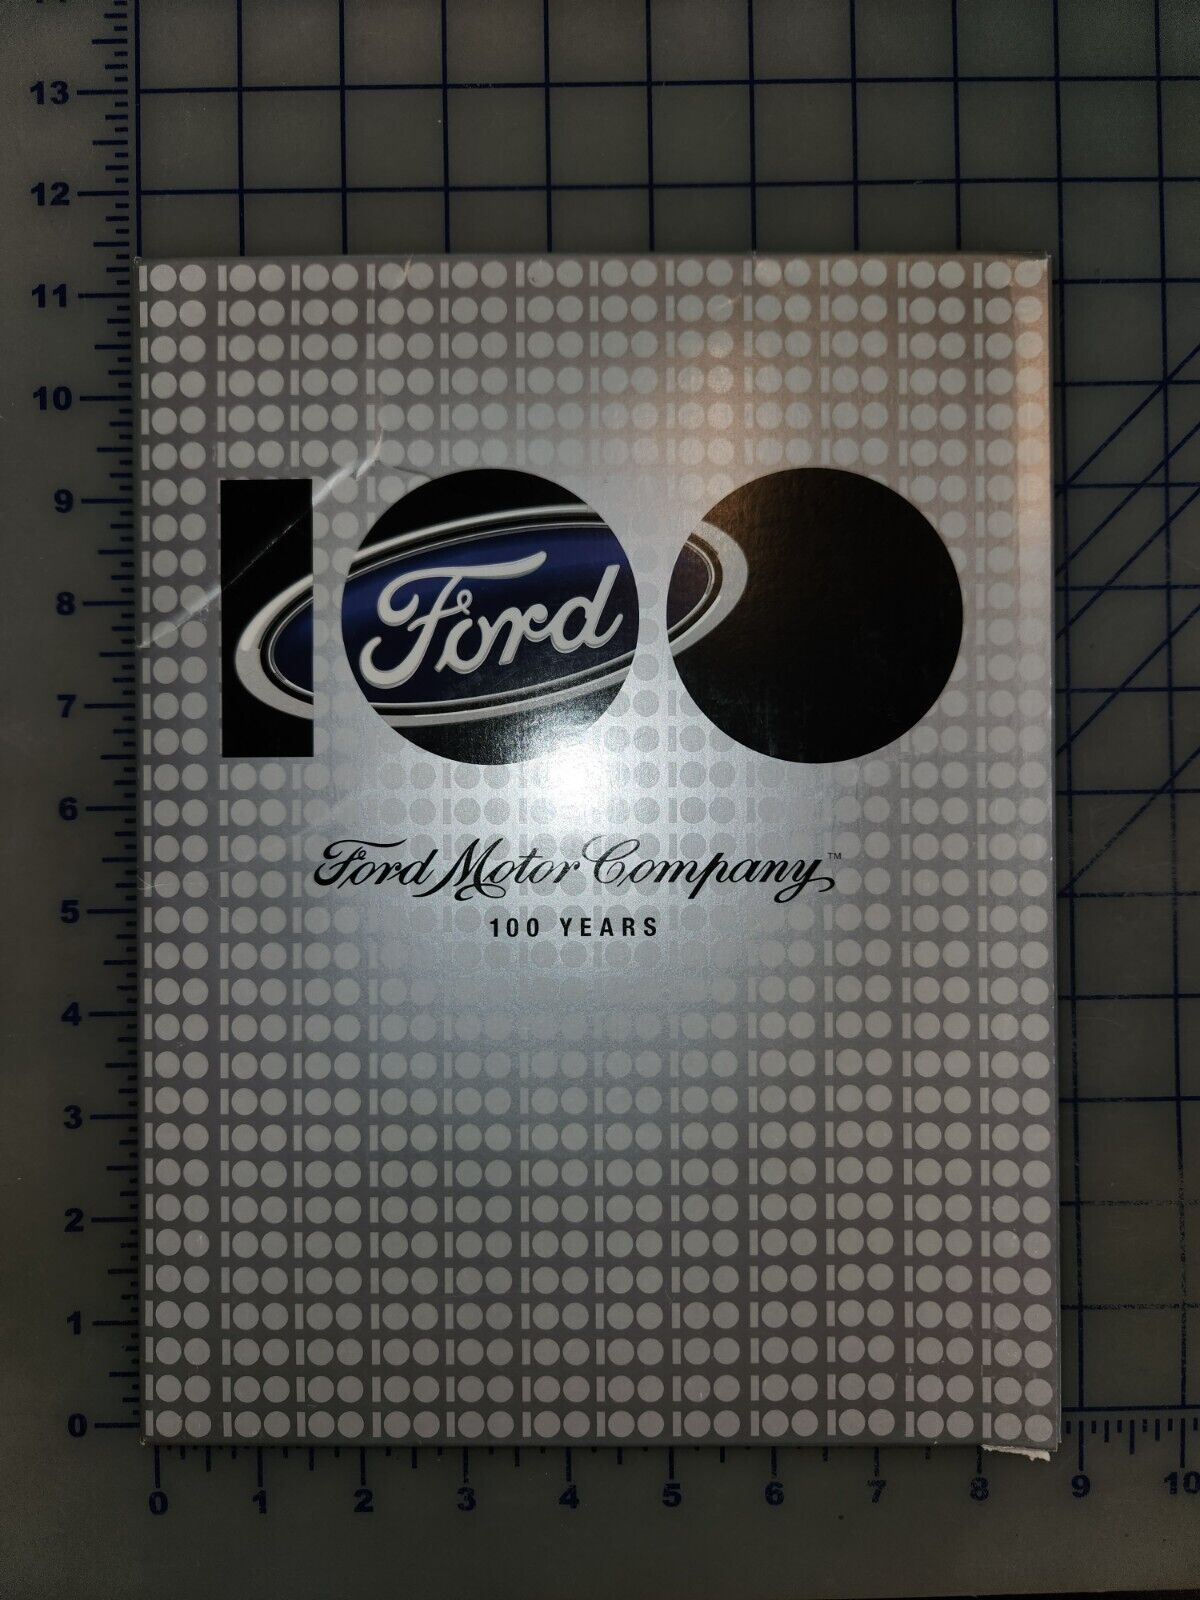 2003 Ford 100 Years Concept Car Press Kit